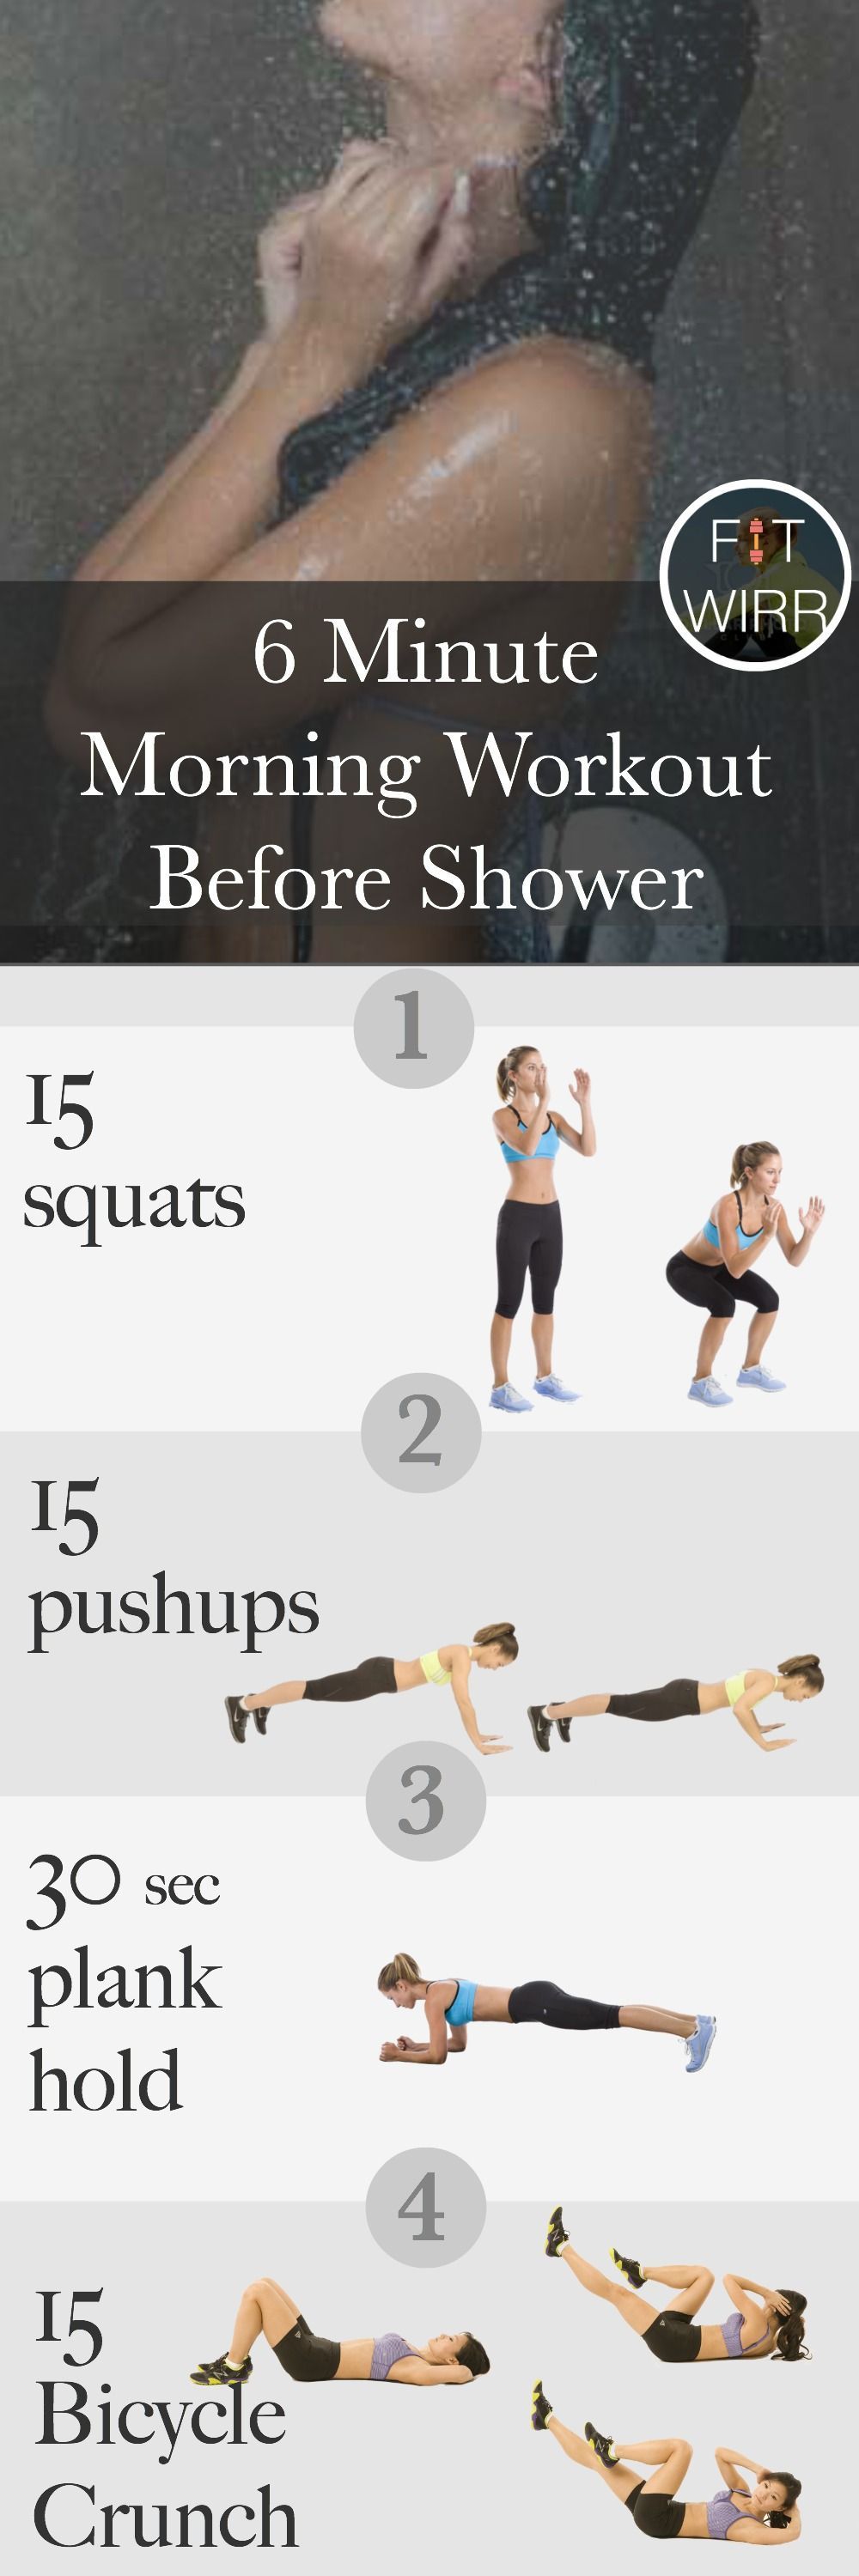 6 minute morning workout ro